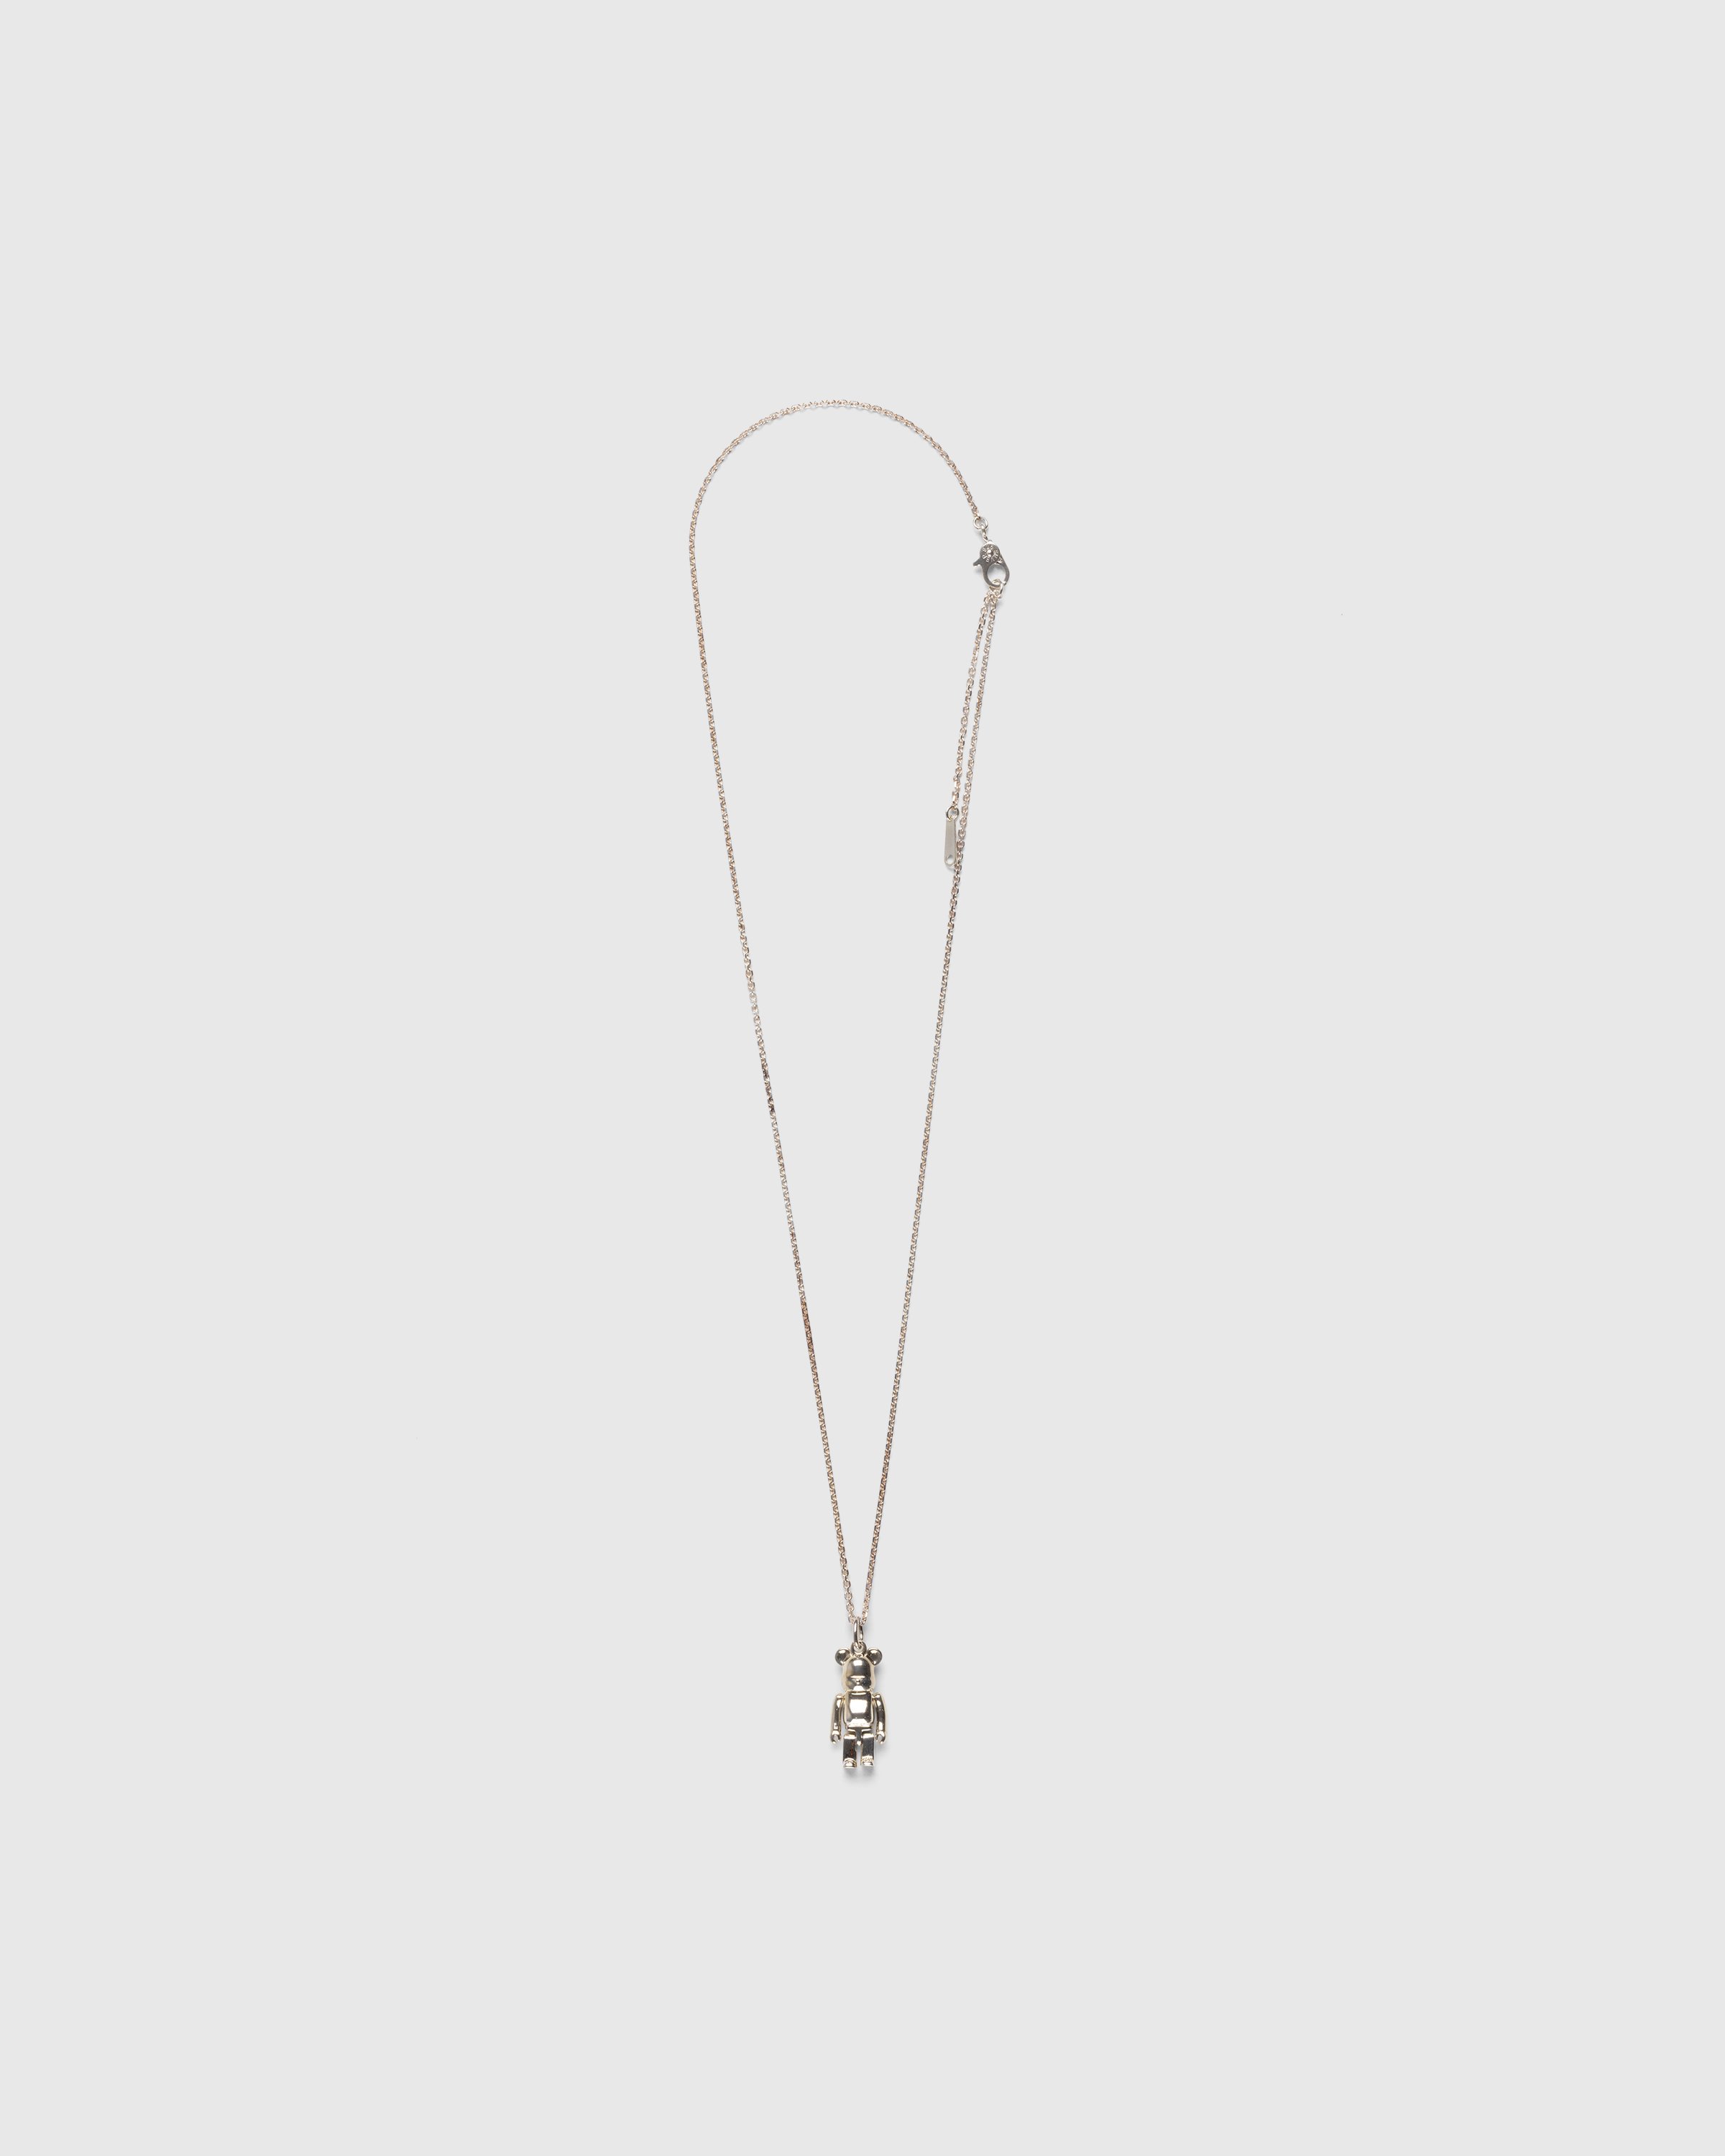 Medicom - Be@rbrick x IVXLCDM Charm Necklace Silver - Accessories - Silver - Image 1